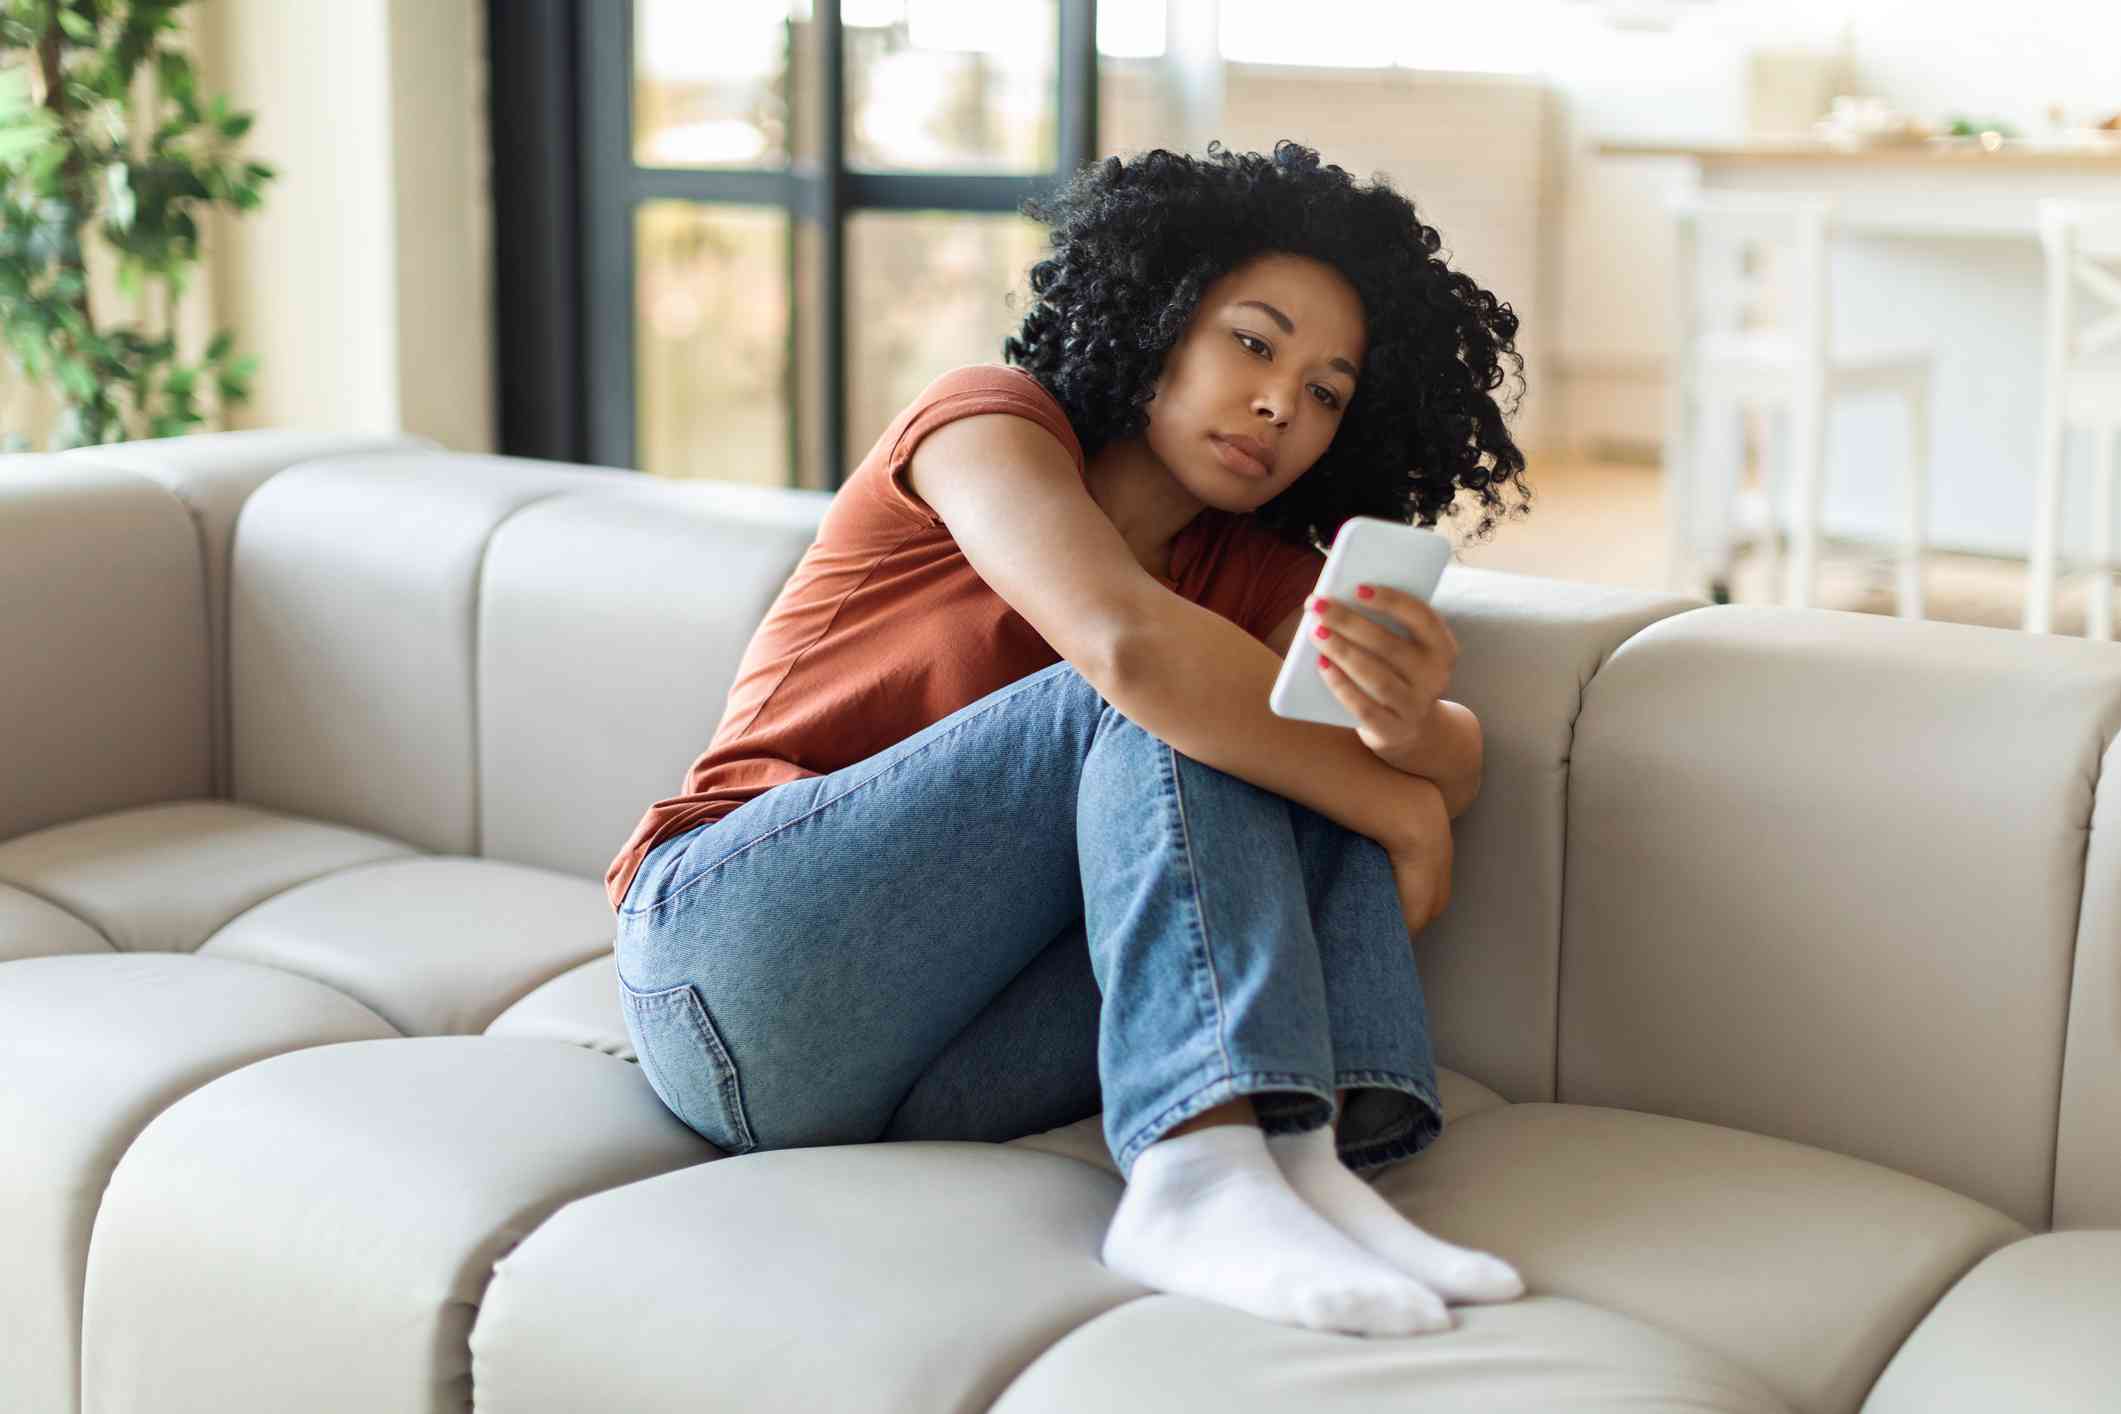 A woman in a red shirt sits curled up on the couch and loks at the phone in her hand with a worried expression.